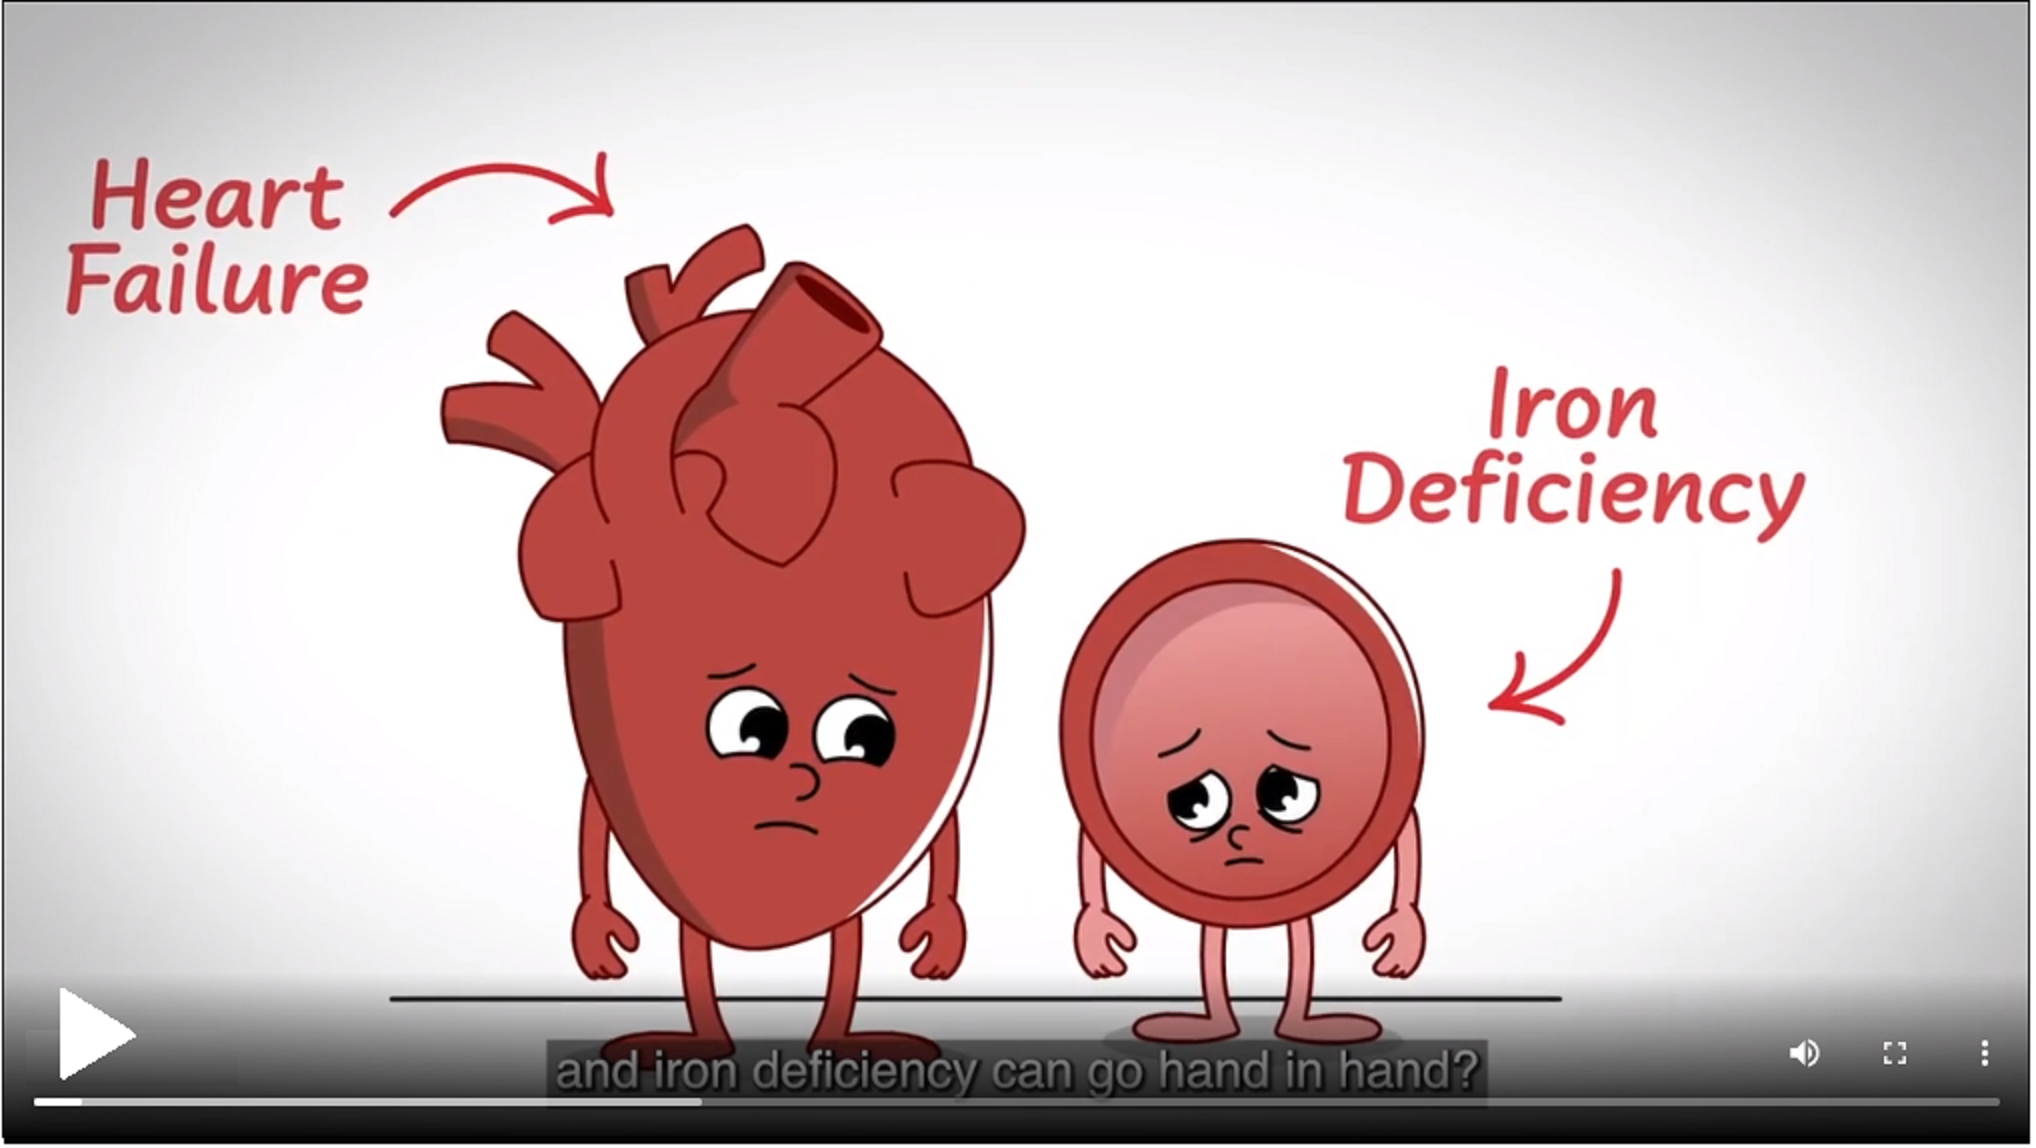 Sponsored: Iron Deficiency Screening: A Critical Step in Heart Failure Treatment